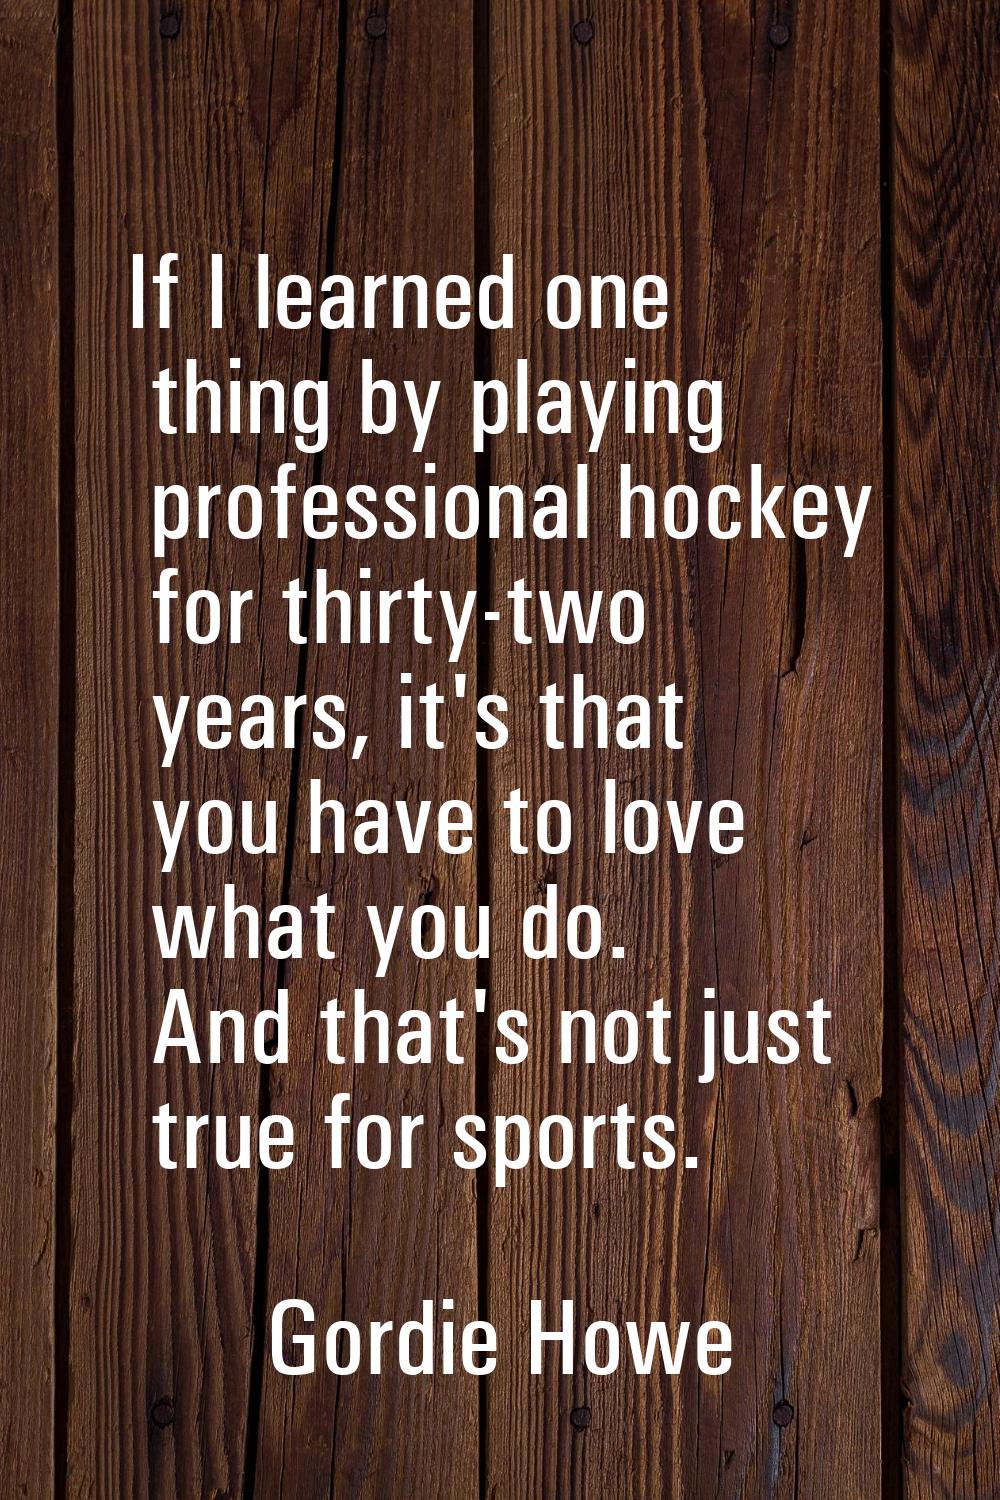 If I learned one thing by playing professional hockey for thirty-two years, it's that you have to l